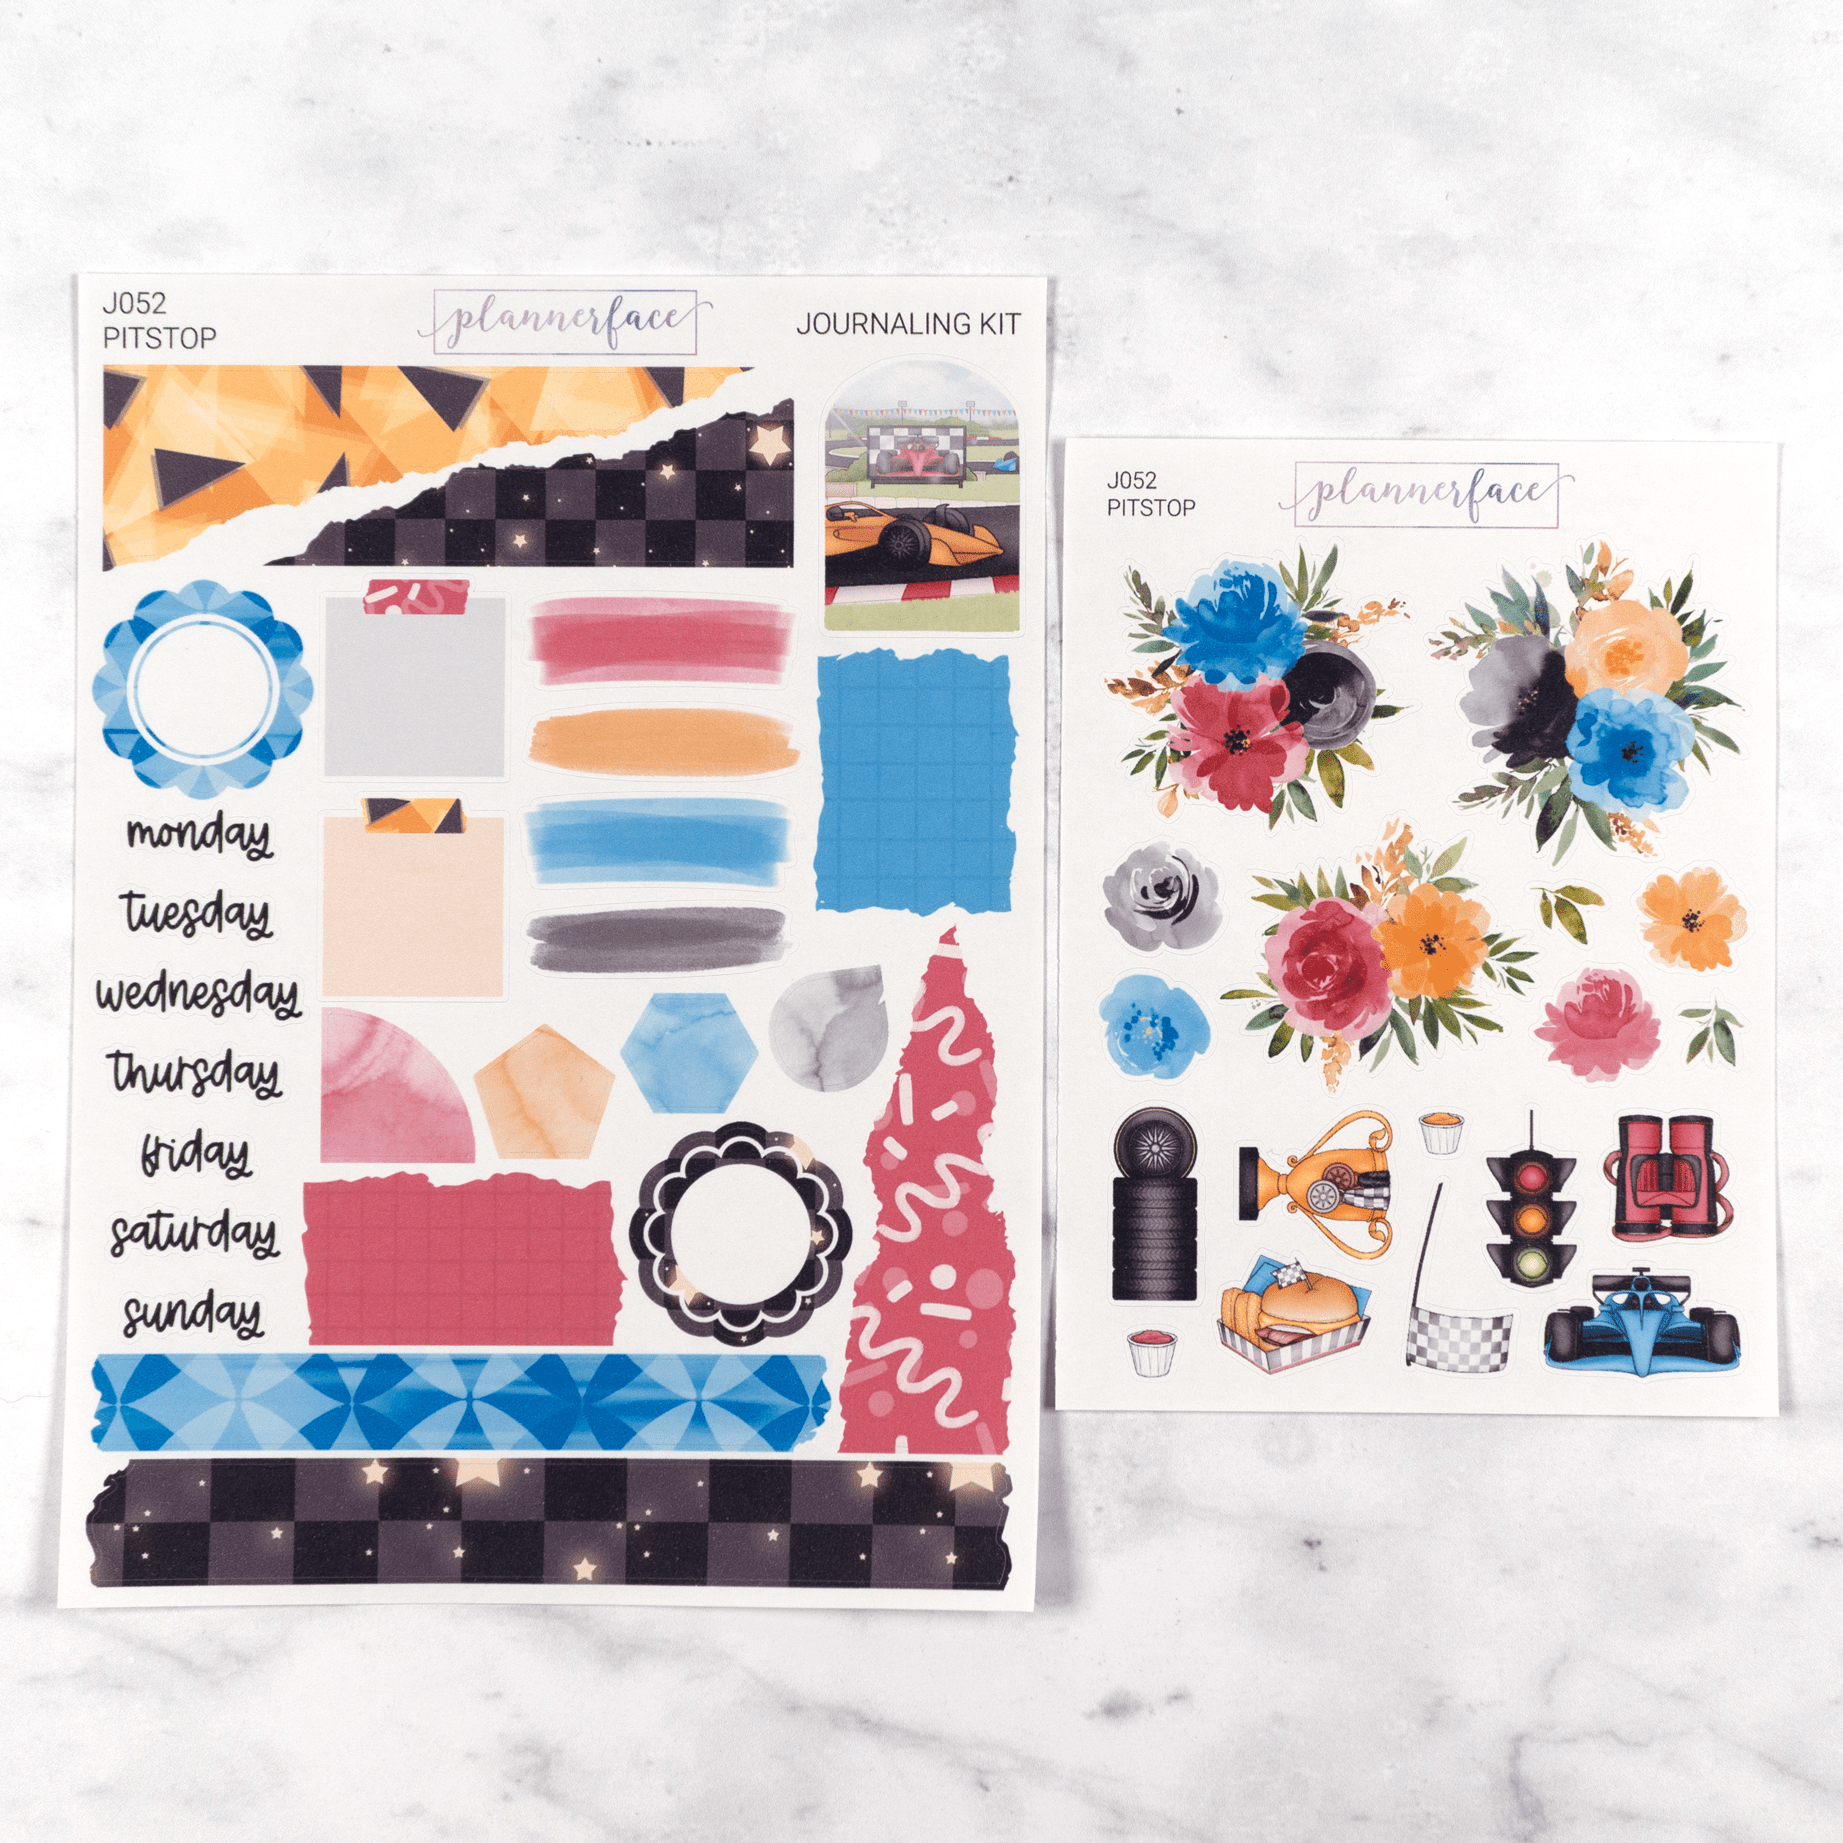 Pitstop | Journaling Kit by Plannerface